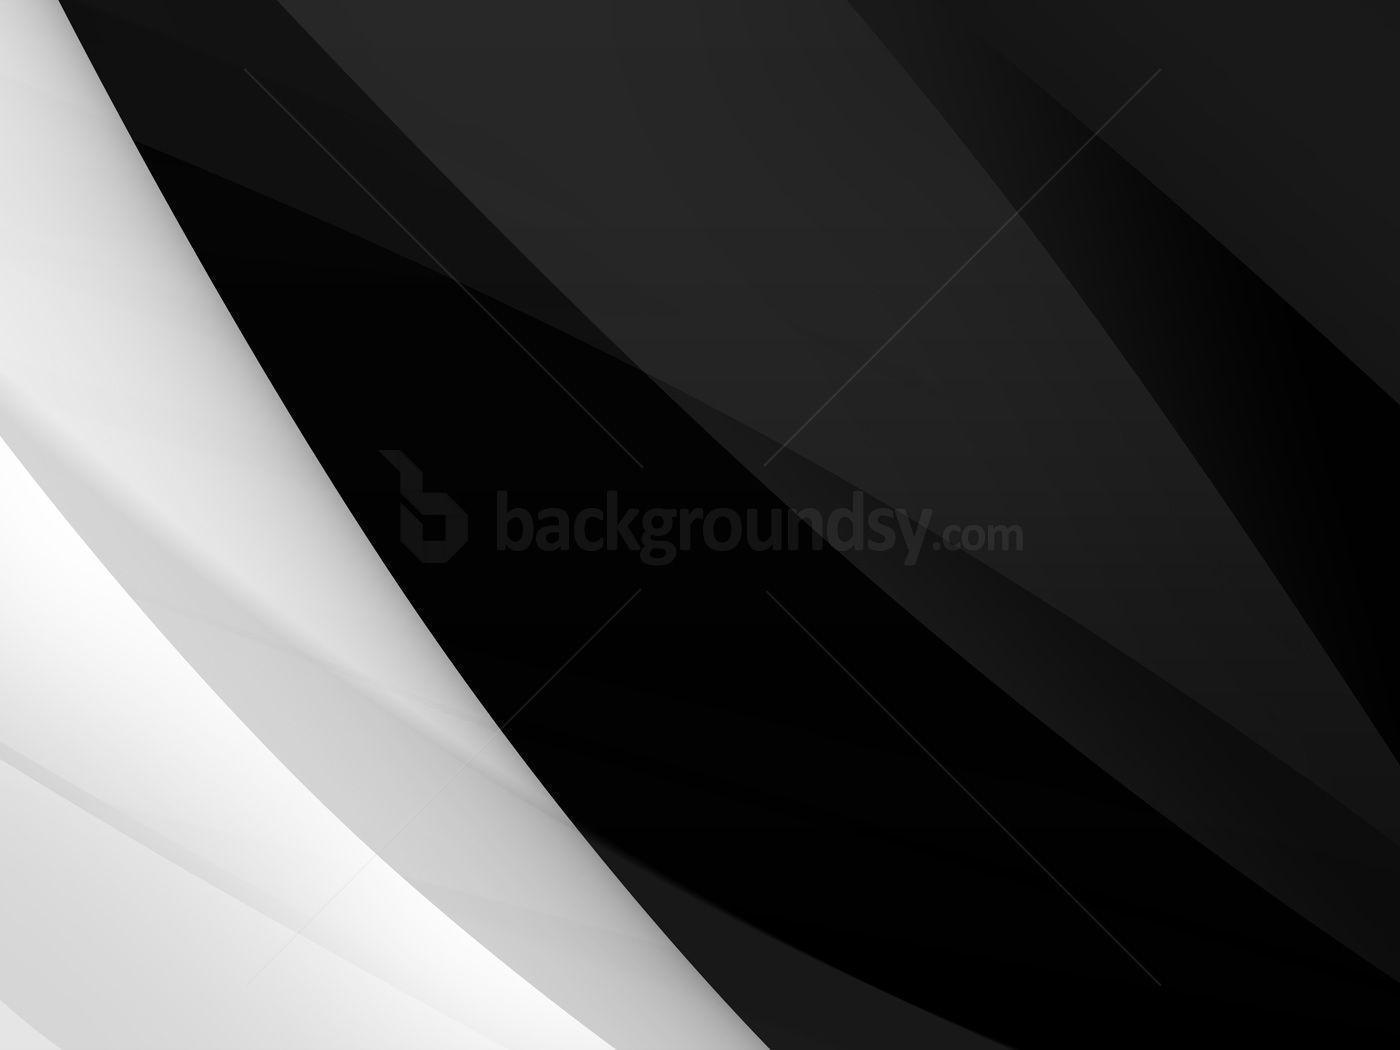 Black & white abstract background